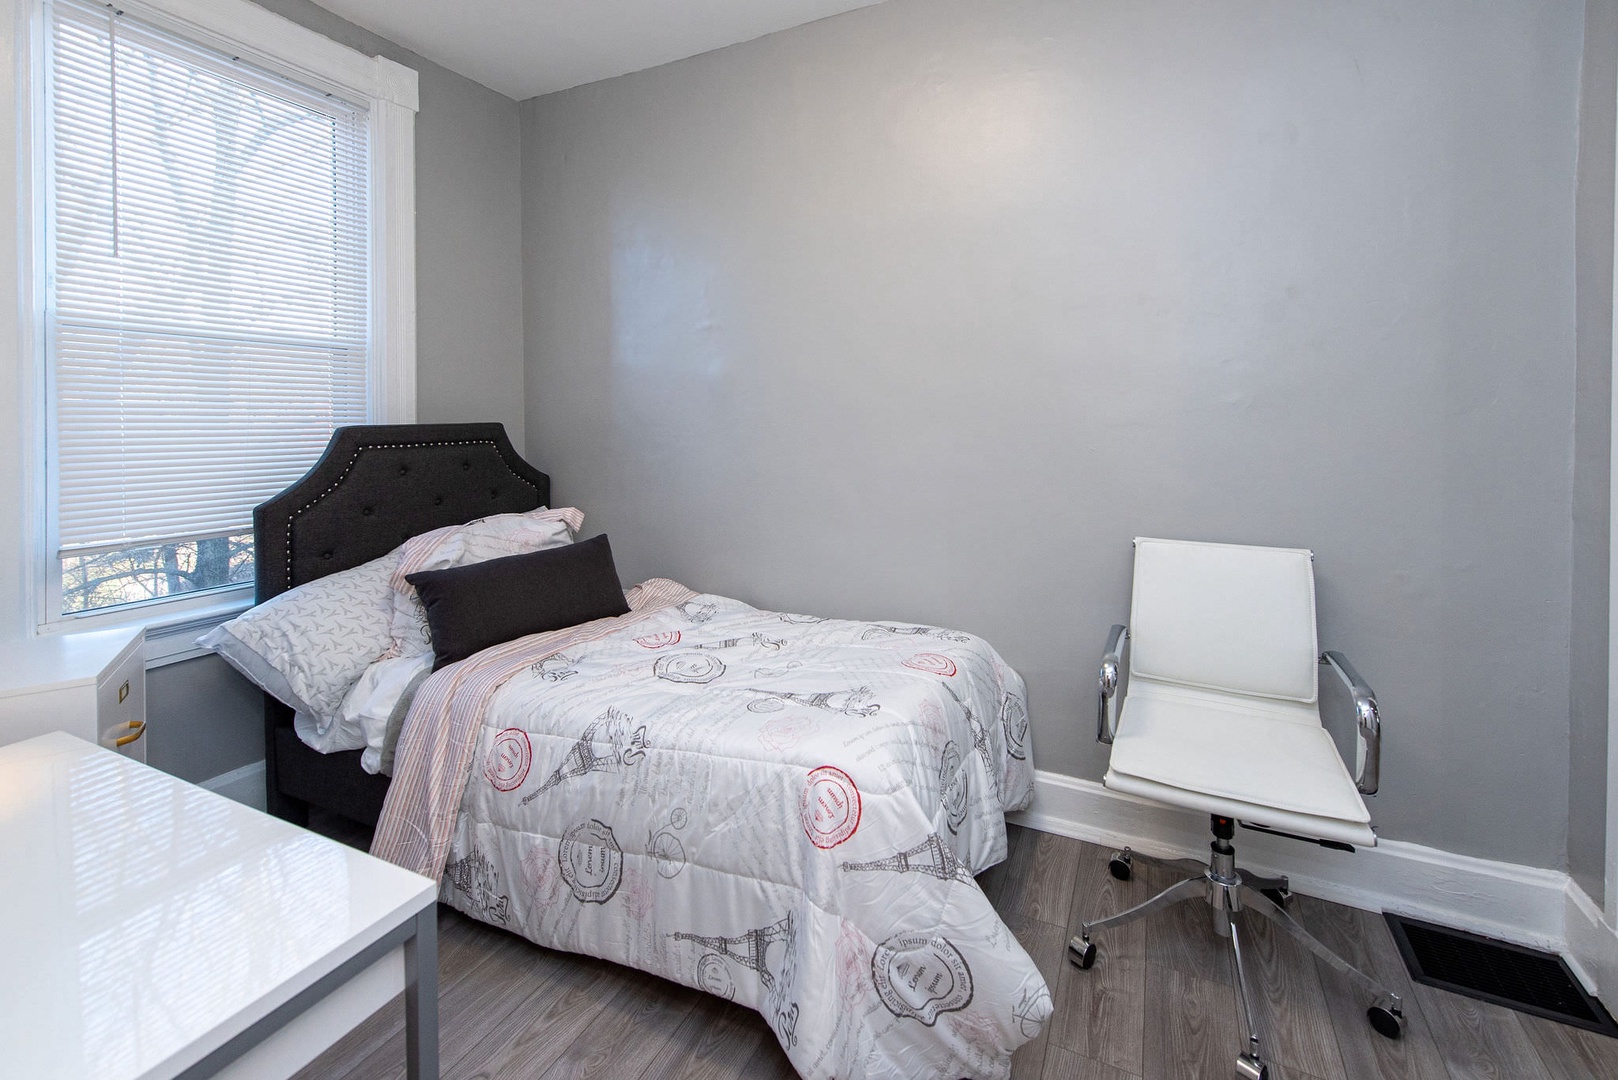 Suite 2 – The final bedroom includes a twin bed, chair, & desk/workspace